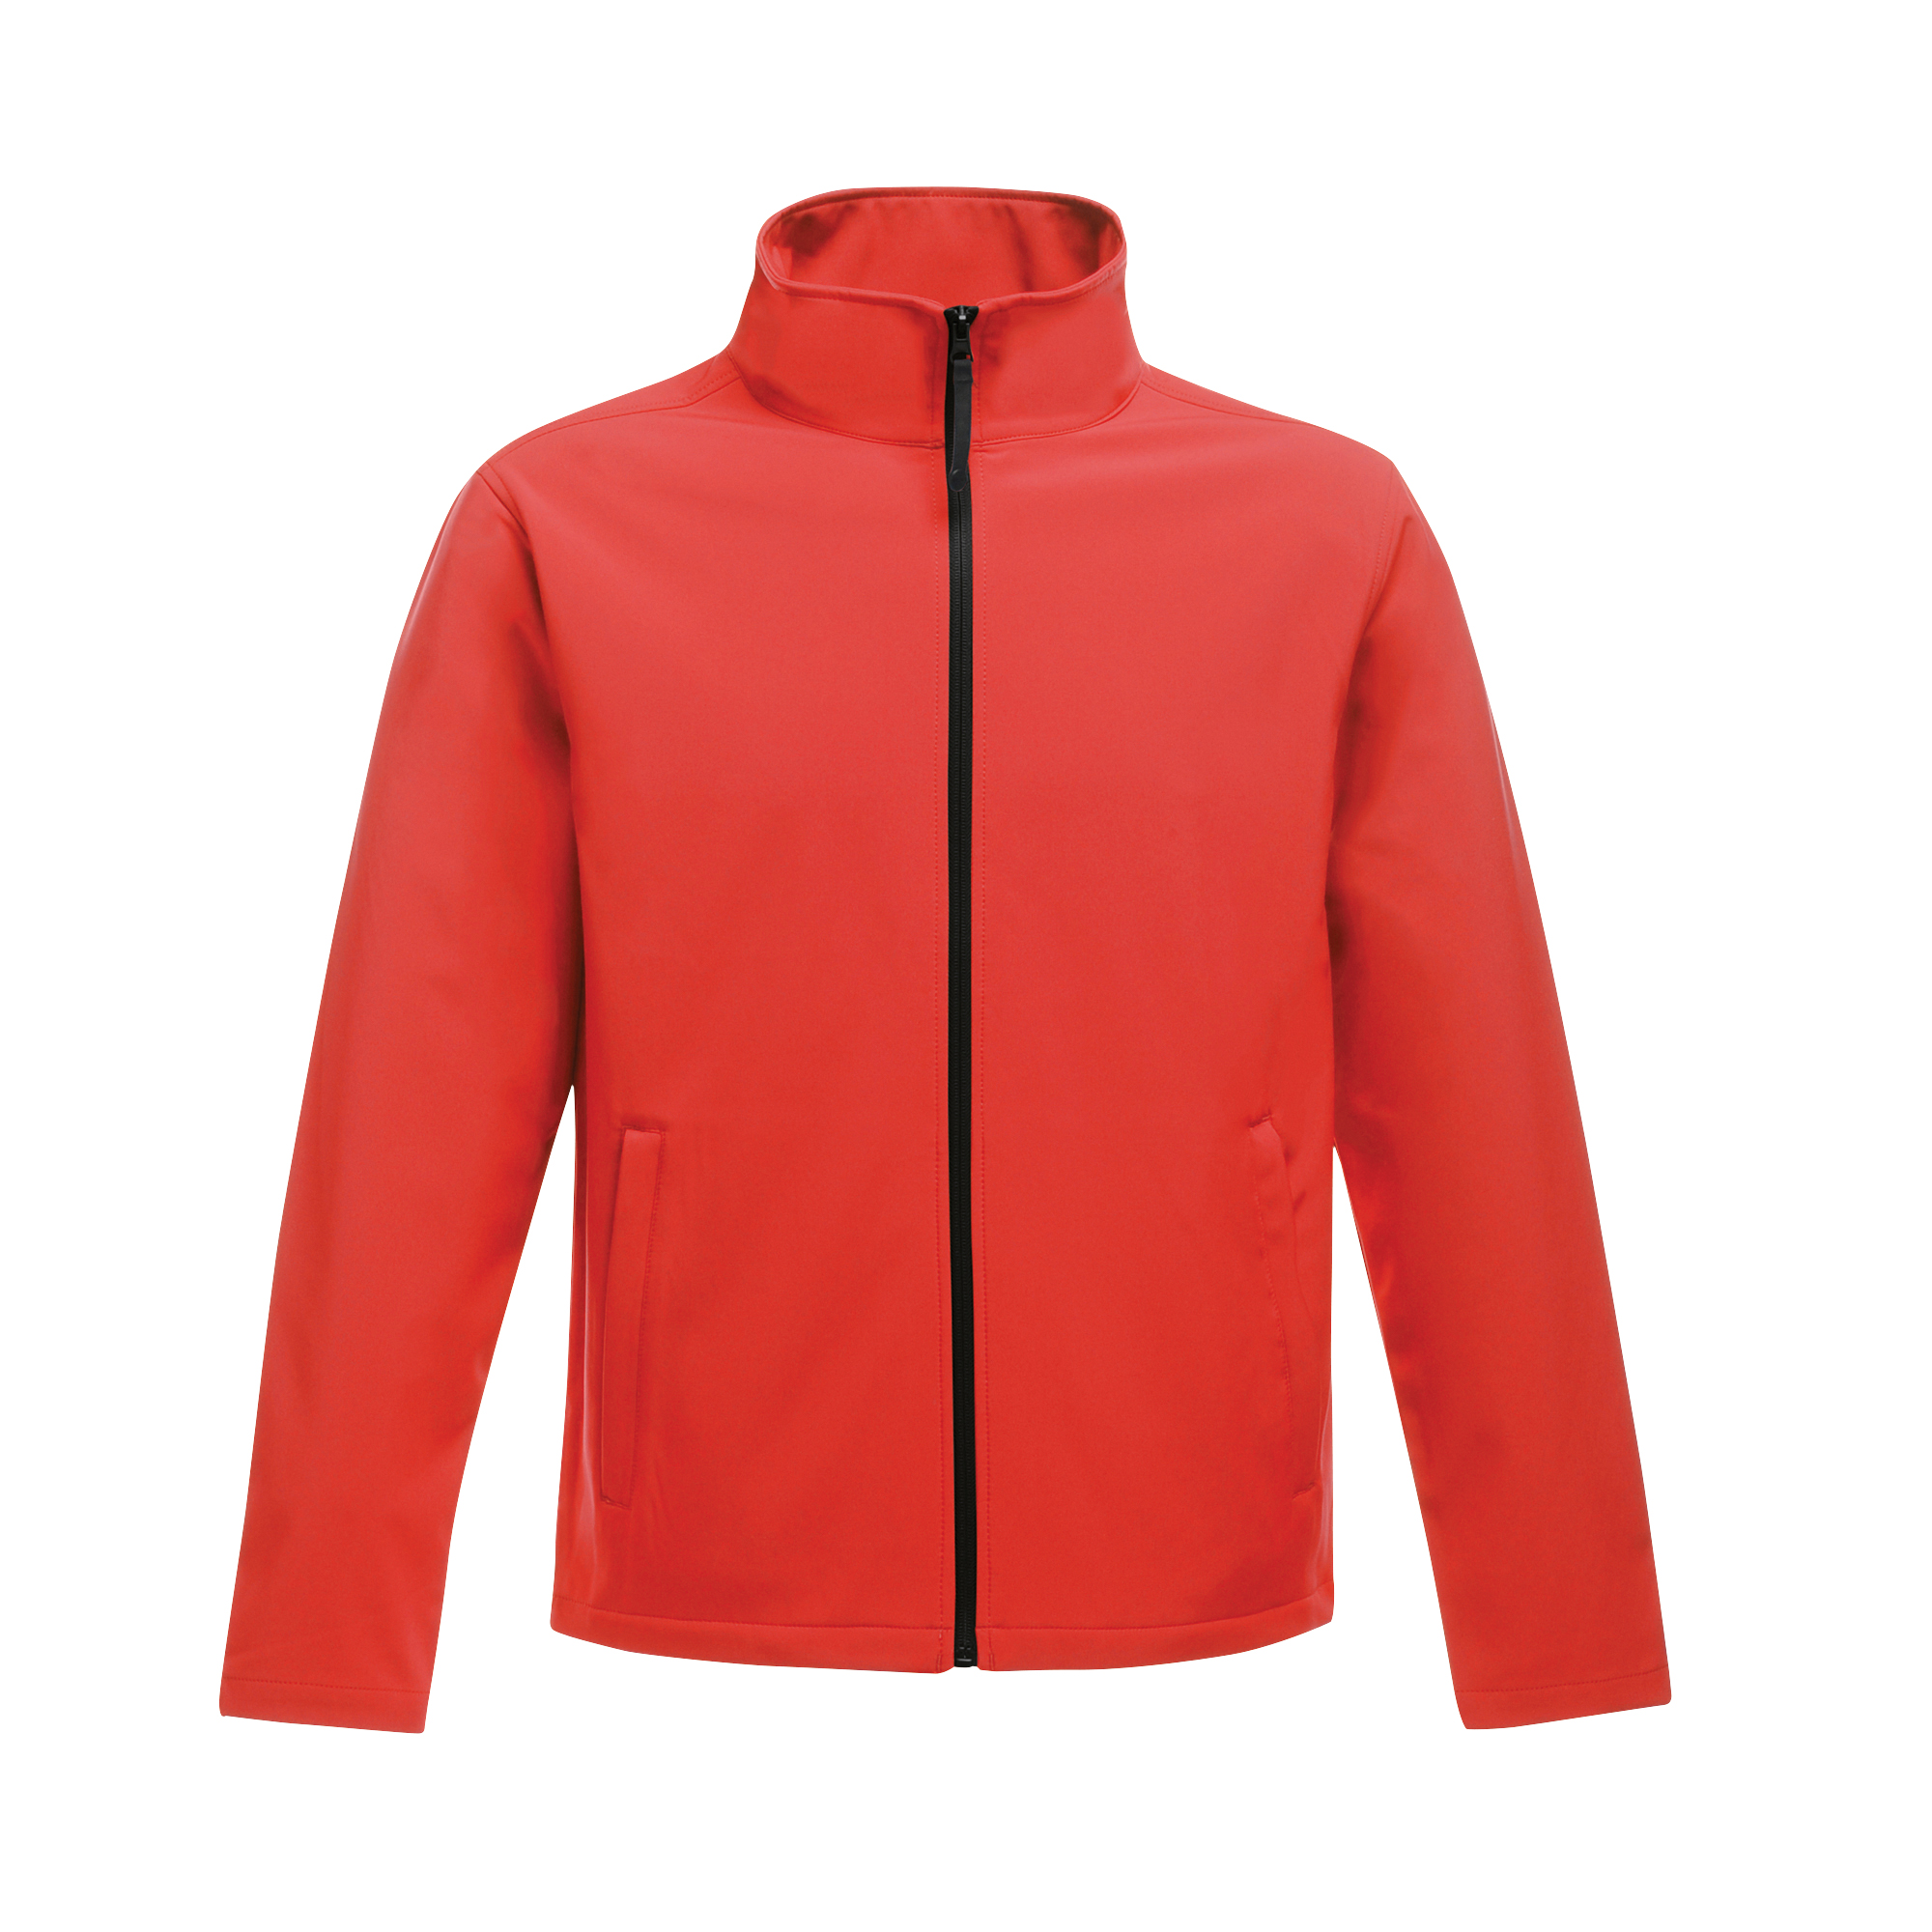 TRA629_Womens_Ablaze_Jacket_ClassicRed_Black_FT